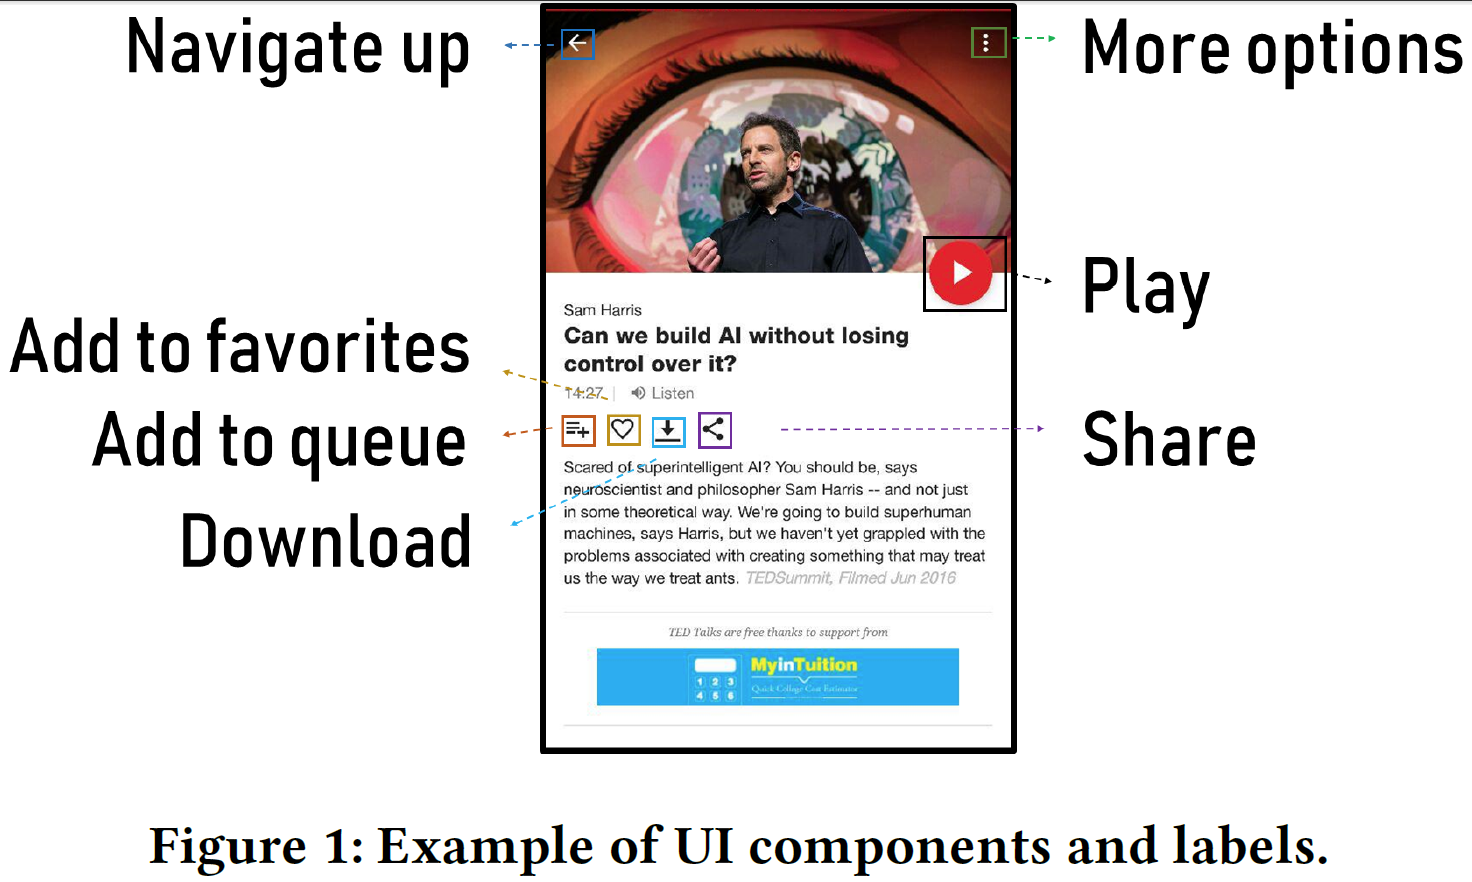 Example of UI components and labels